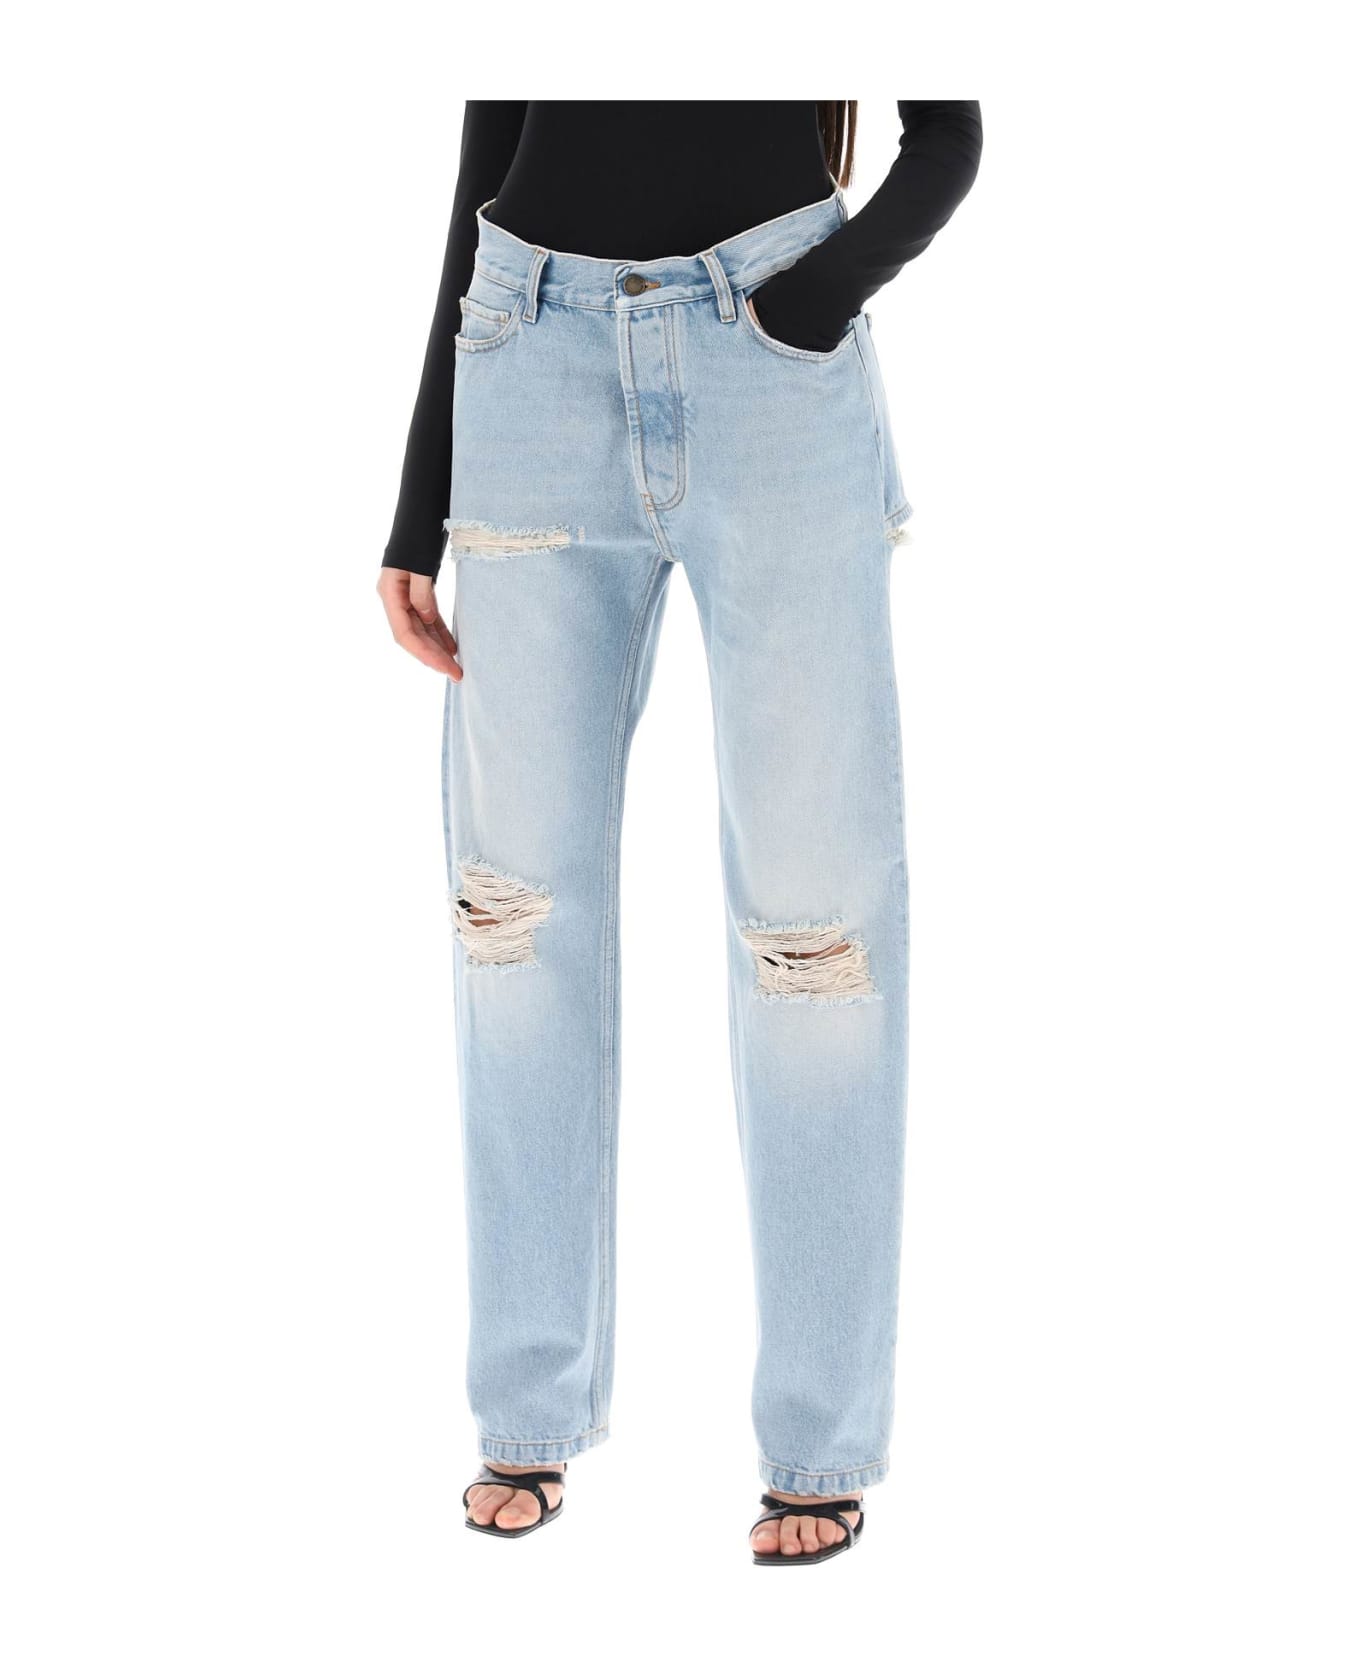 DARKPARK Naomi Jeans With Rips And Cut Outs - LIGHT WASH RIPPED (Light blue)